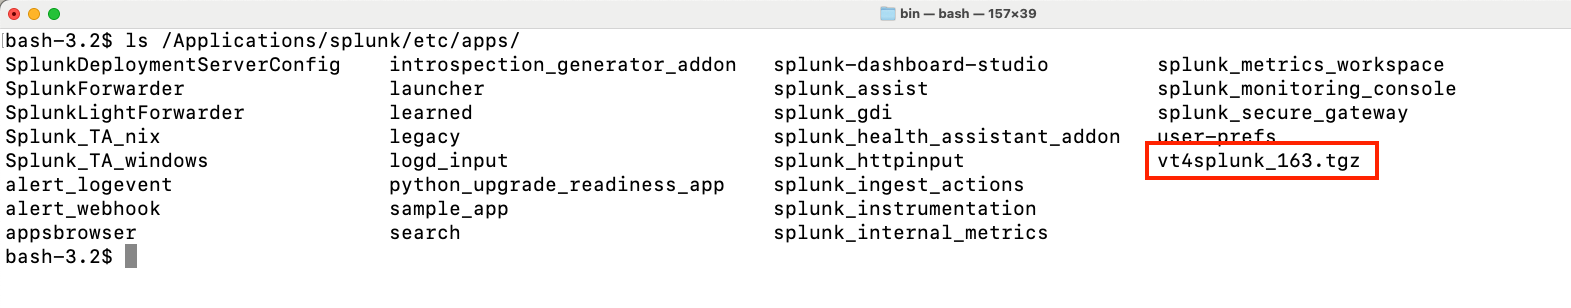 Terminal screen displaying the contents of the Splunk applications directory, highlighting a downloaded archive file.